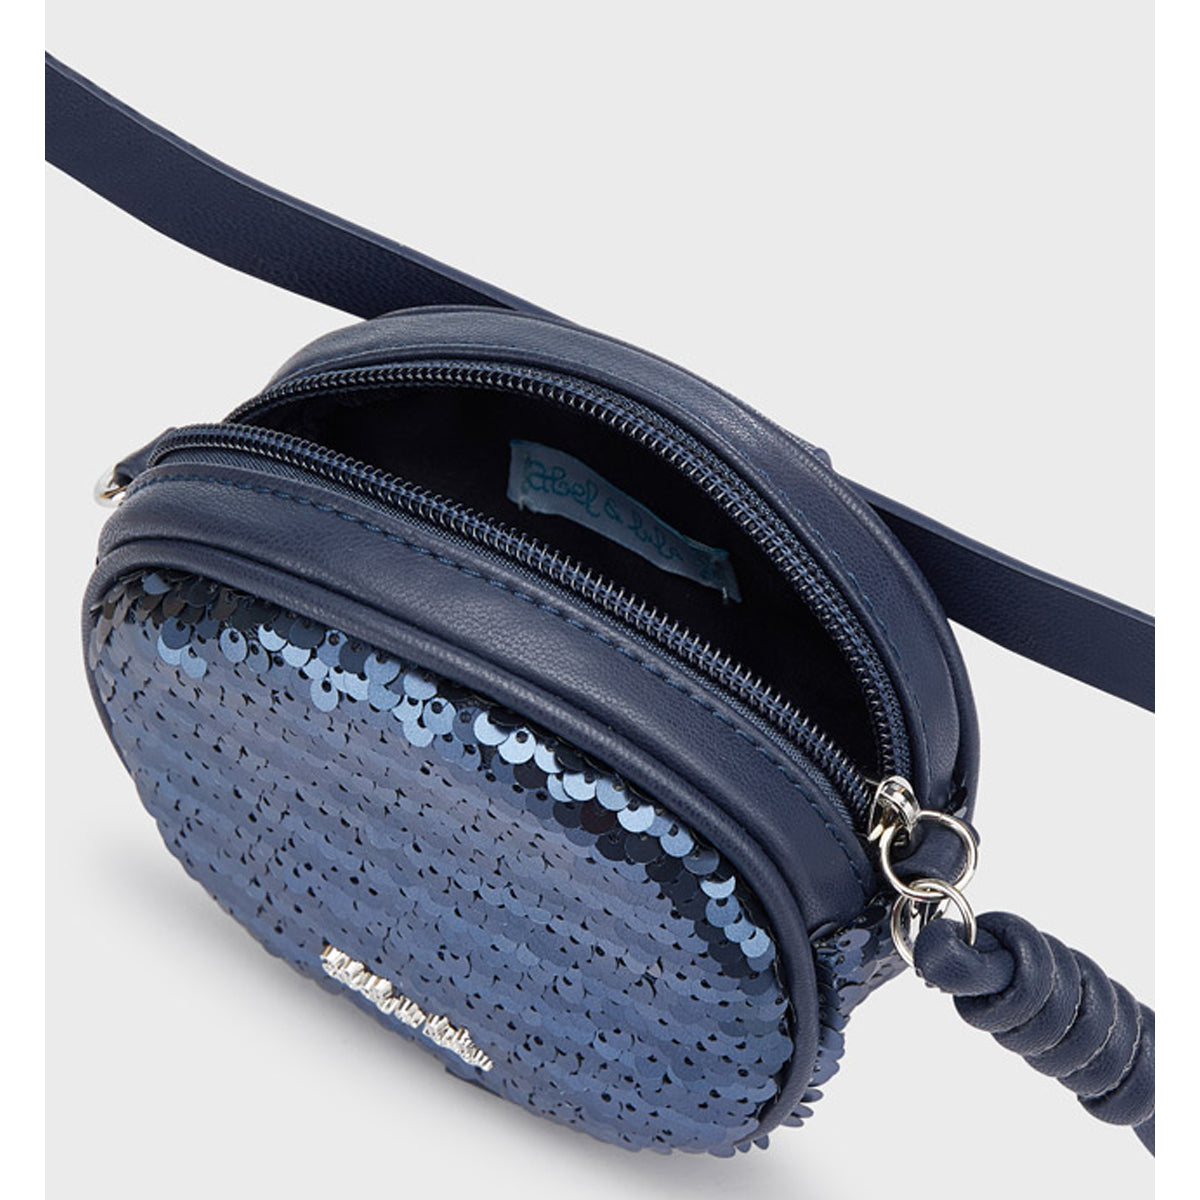 Navy Blue Sequin Fanny Pack/Purse